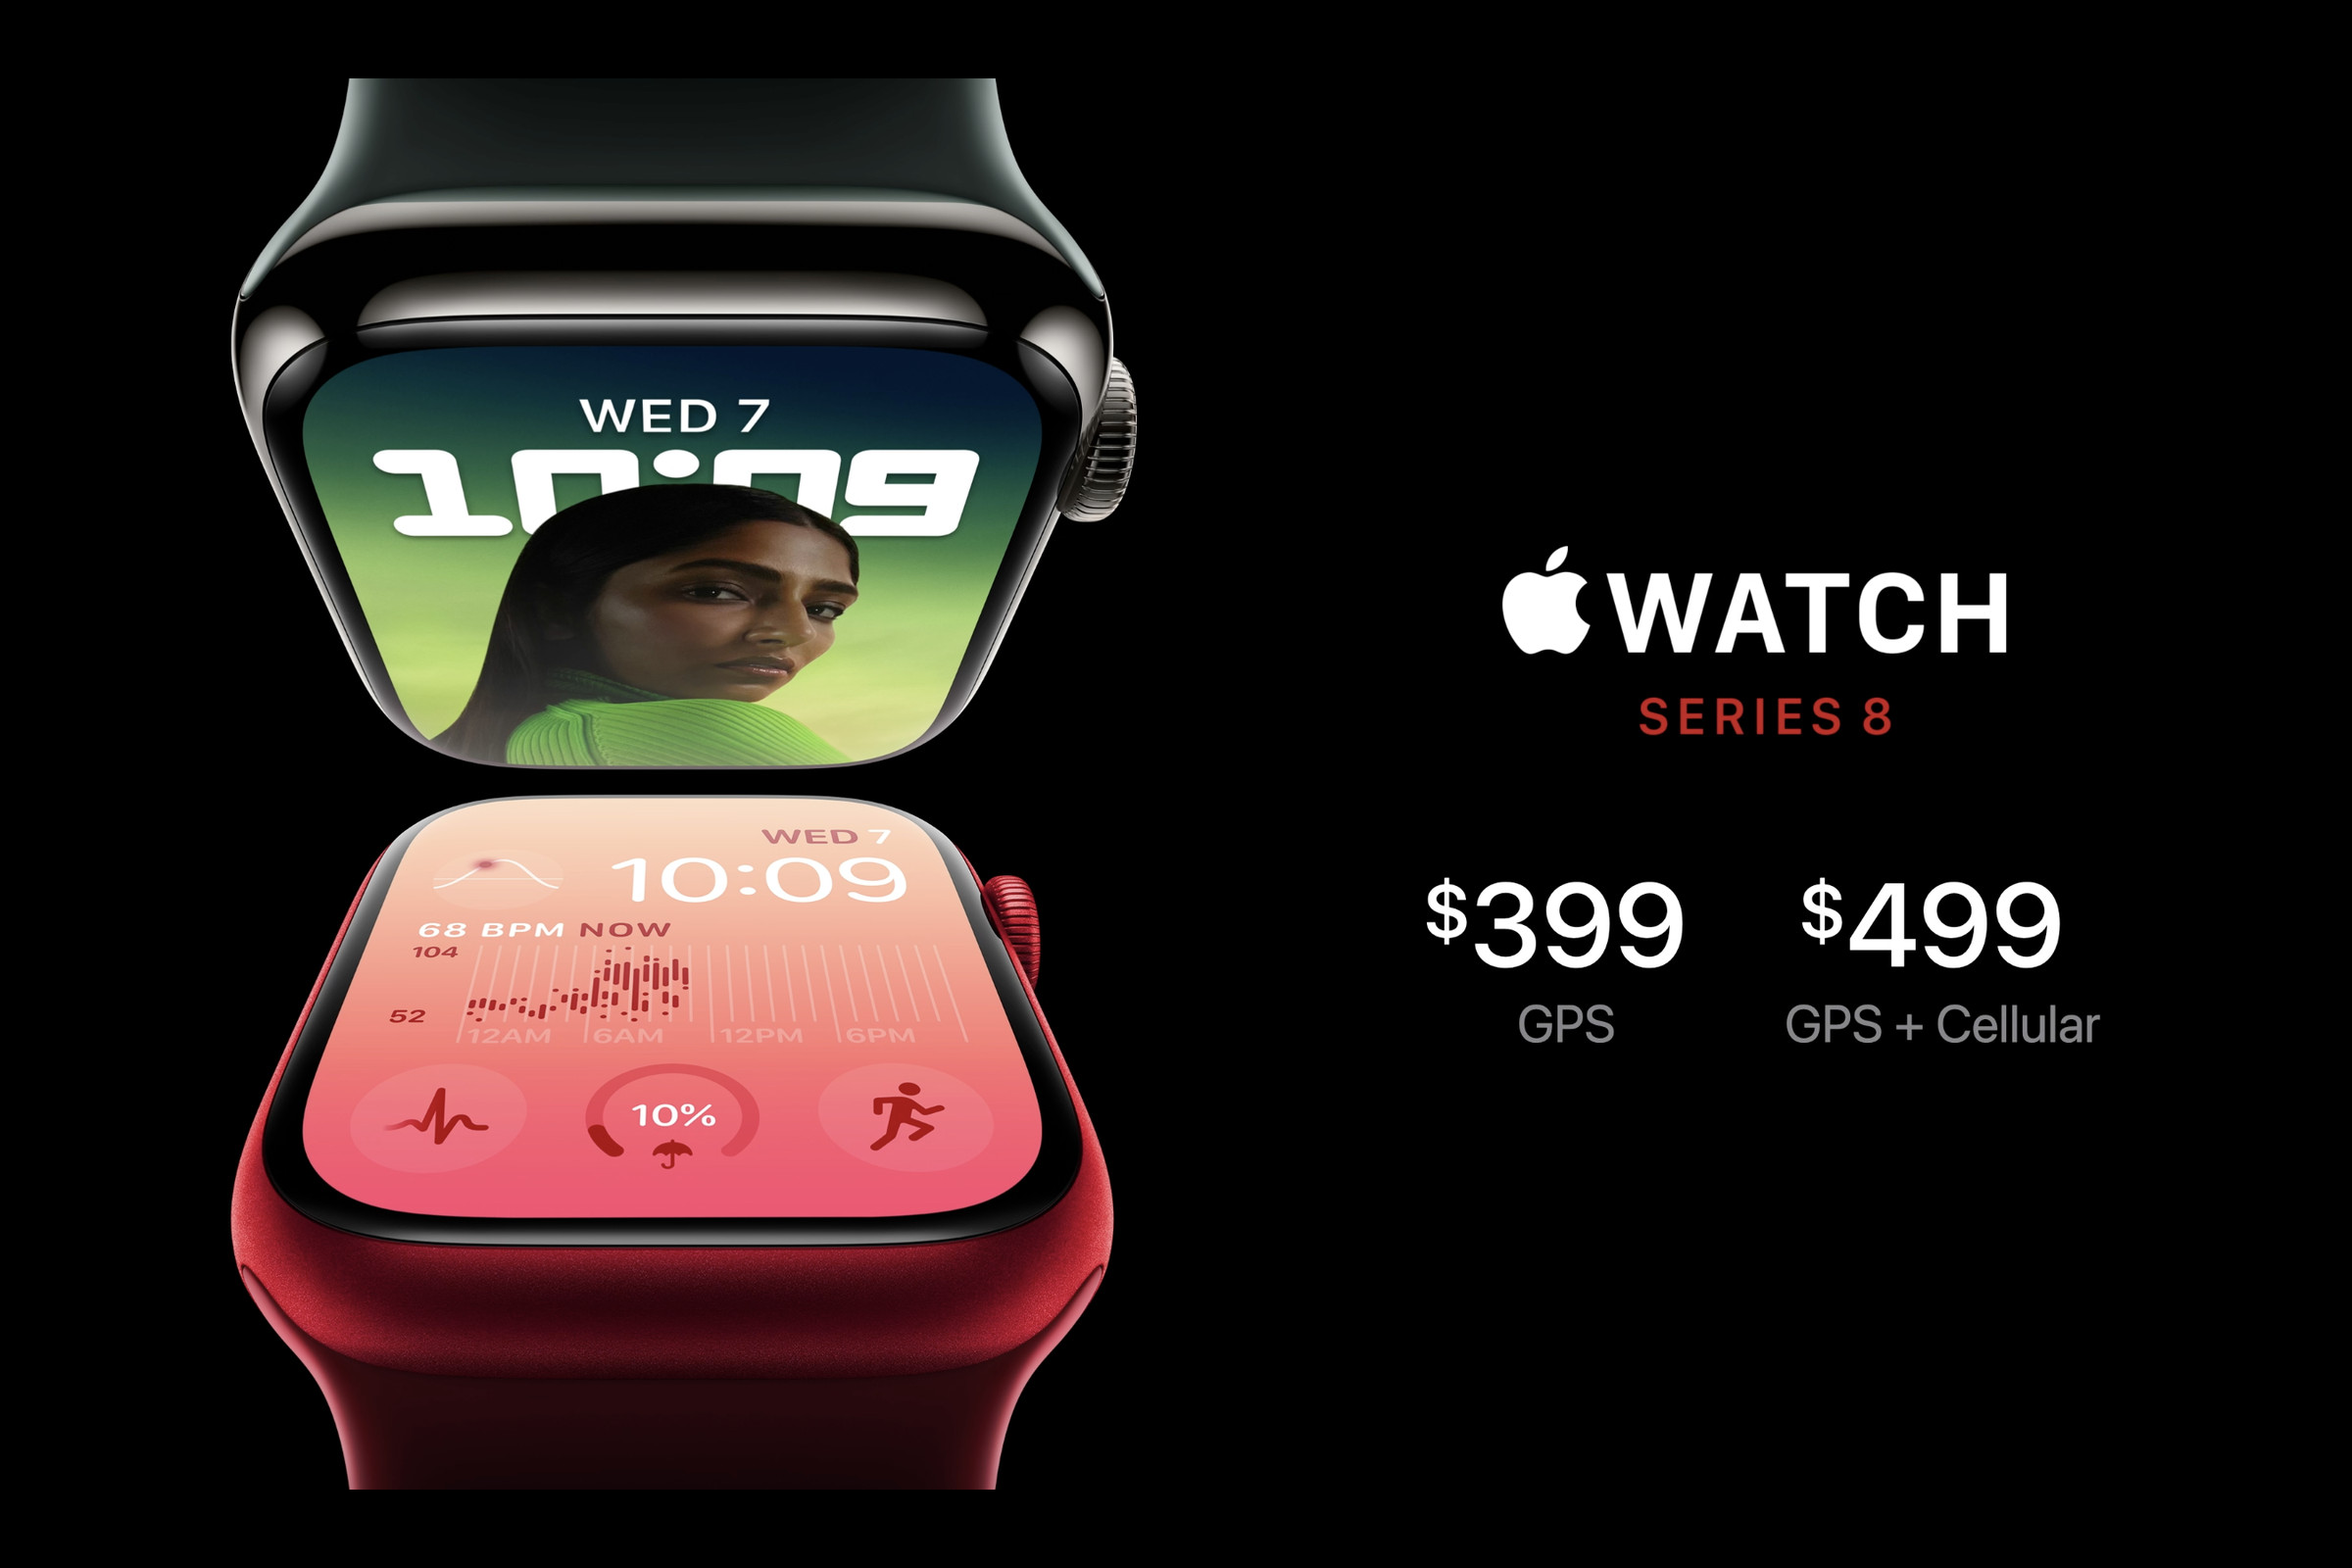 Image of the Apple Watch Series 8 along with the price of $399 for the GPS model and $499 for the cellular model.